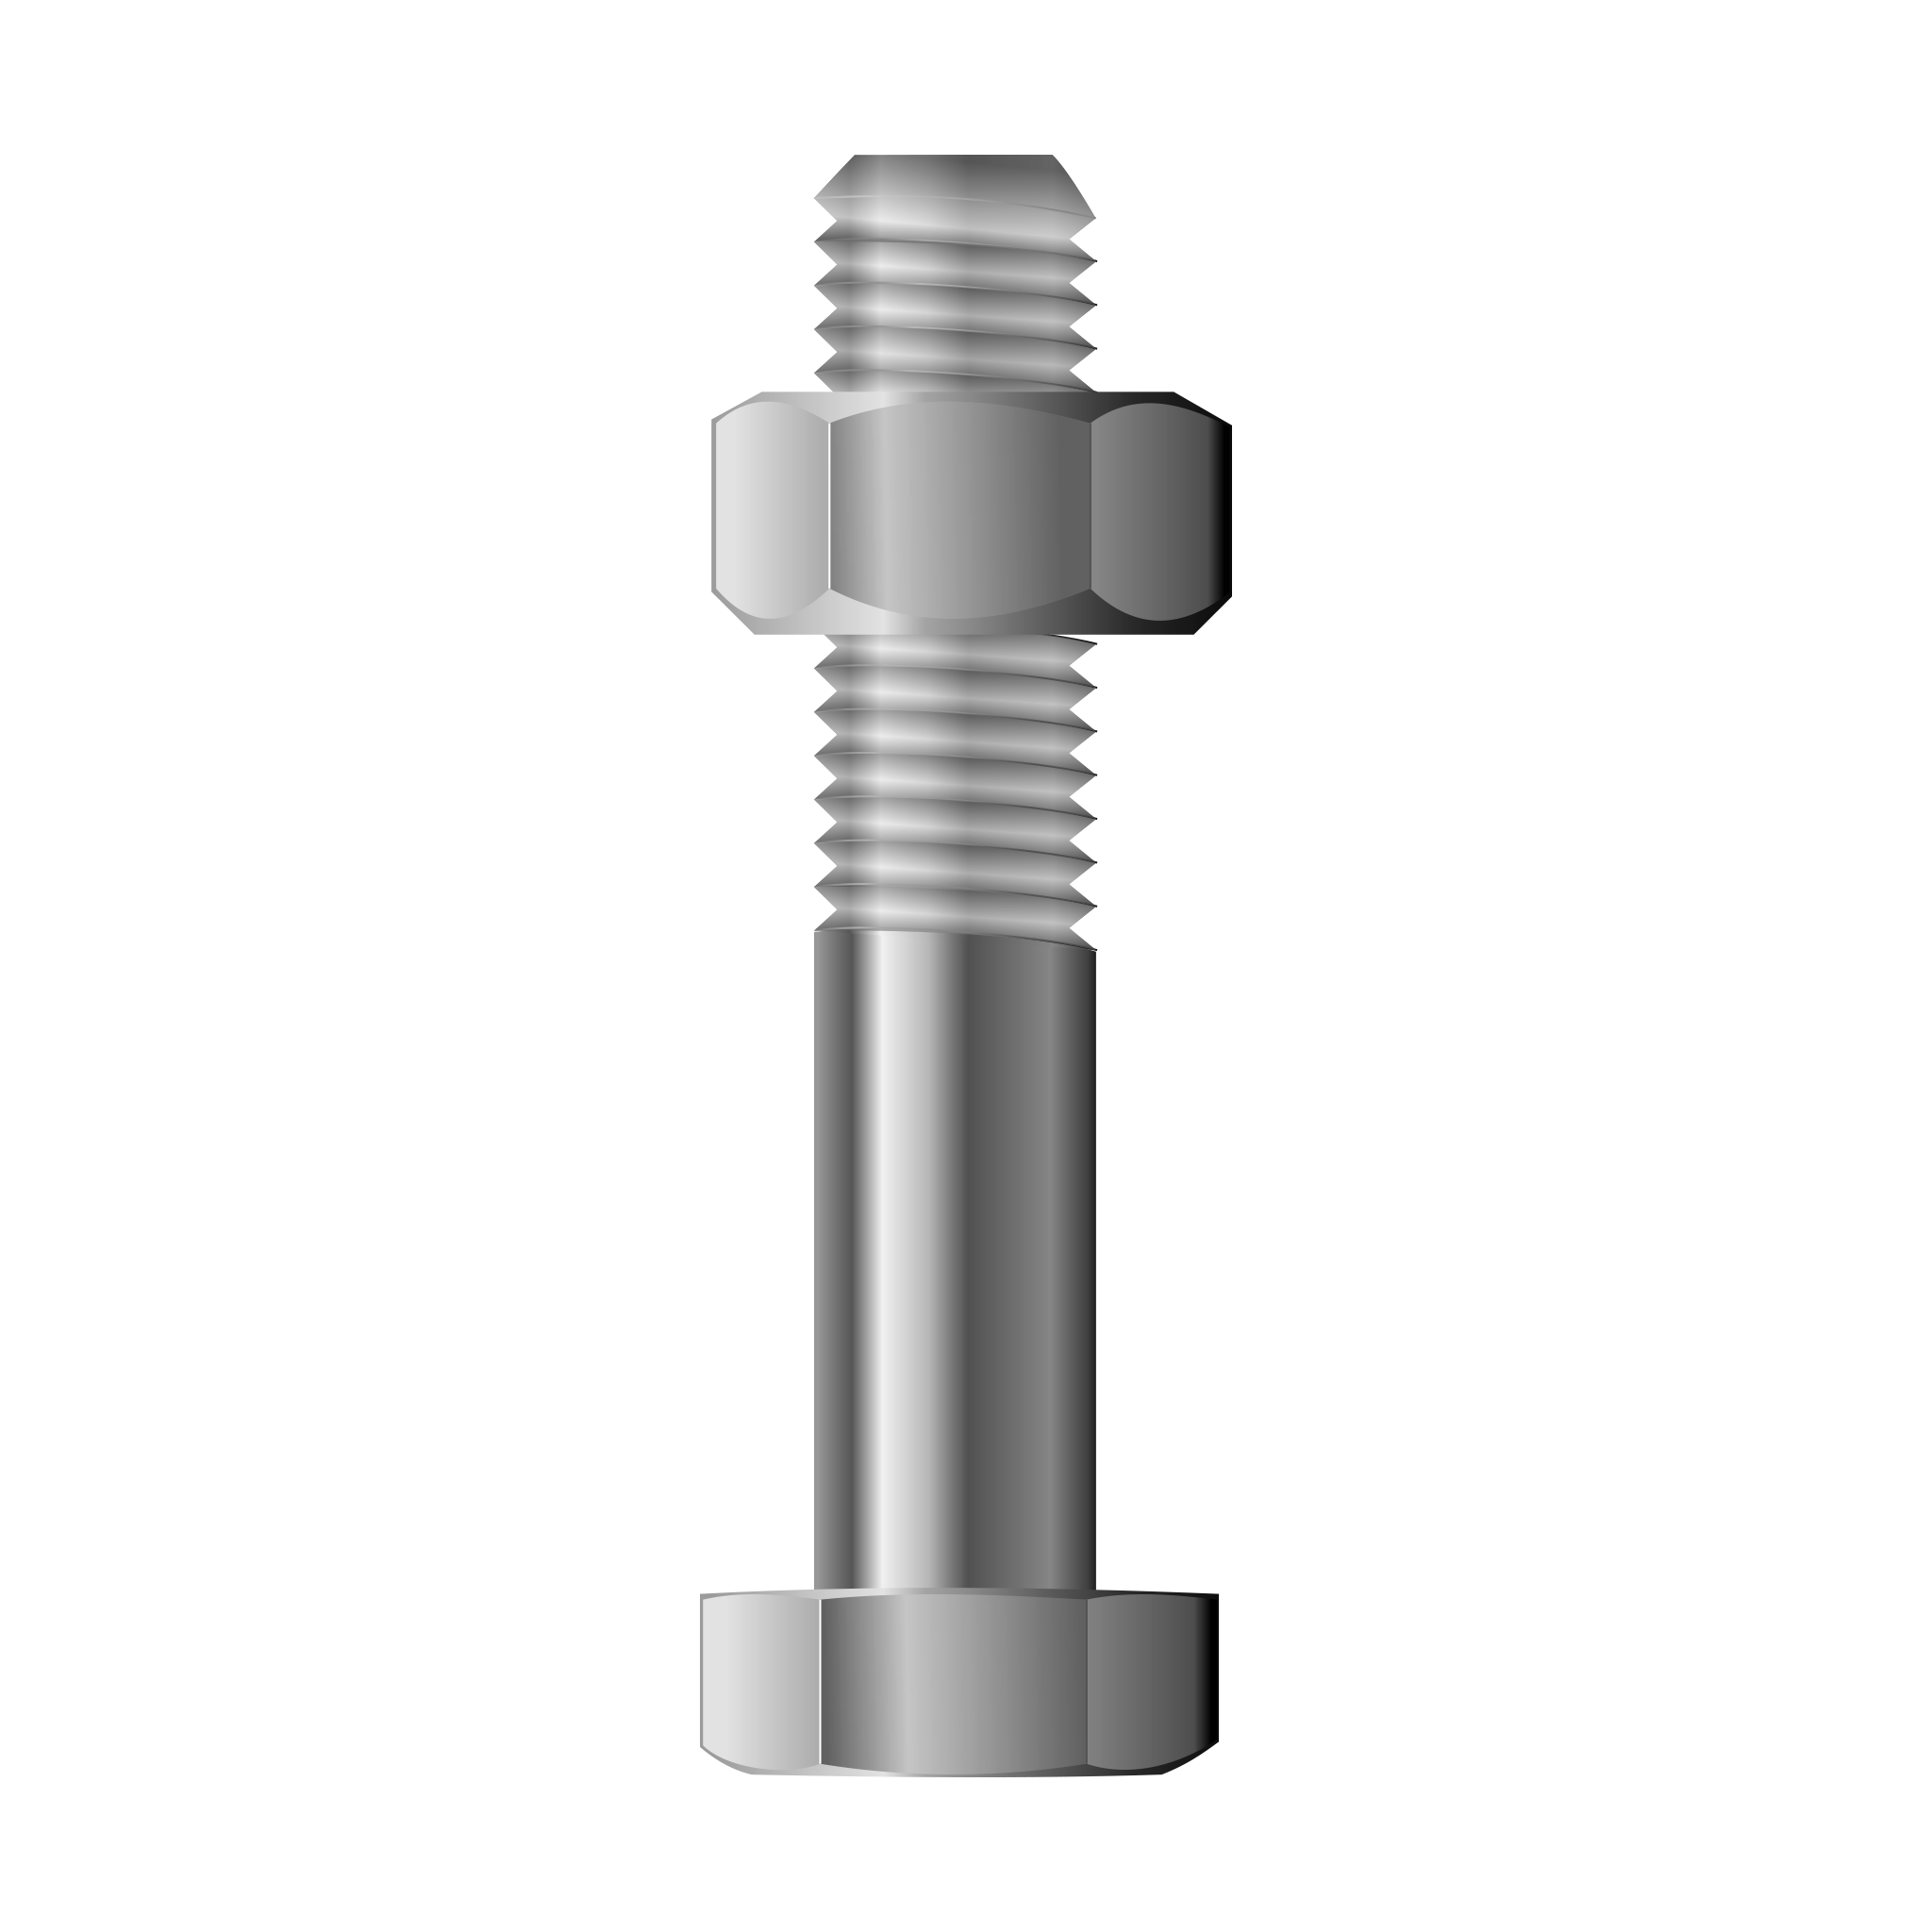 Nut Bolt PNG Clipart Free Download searchpng.com.